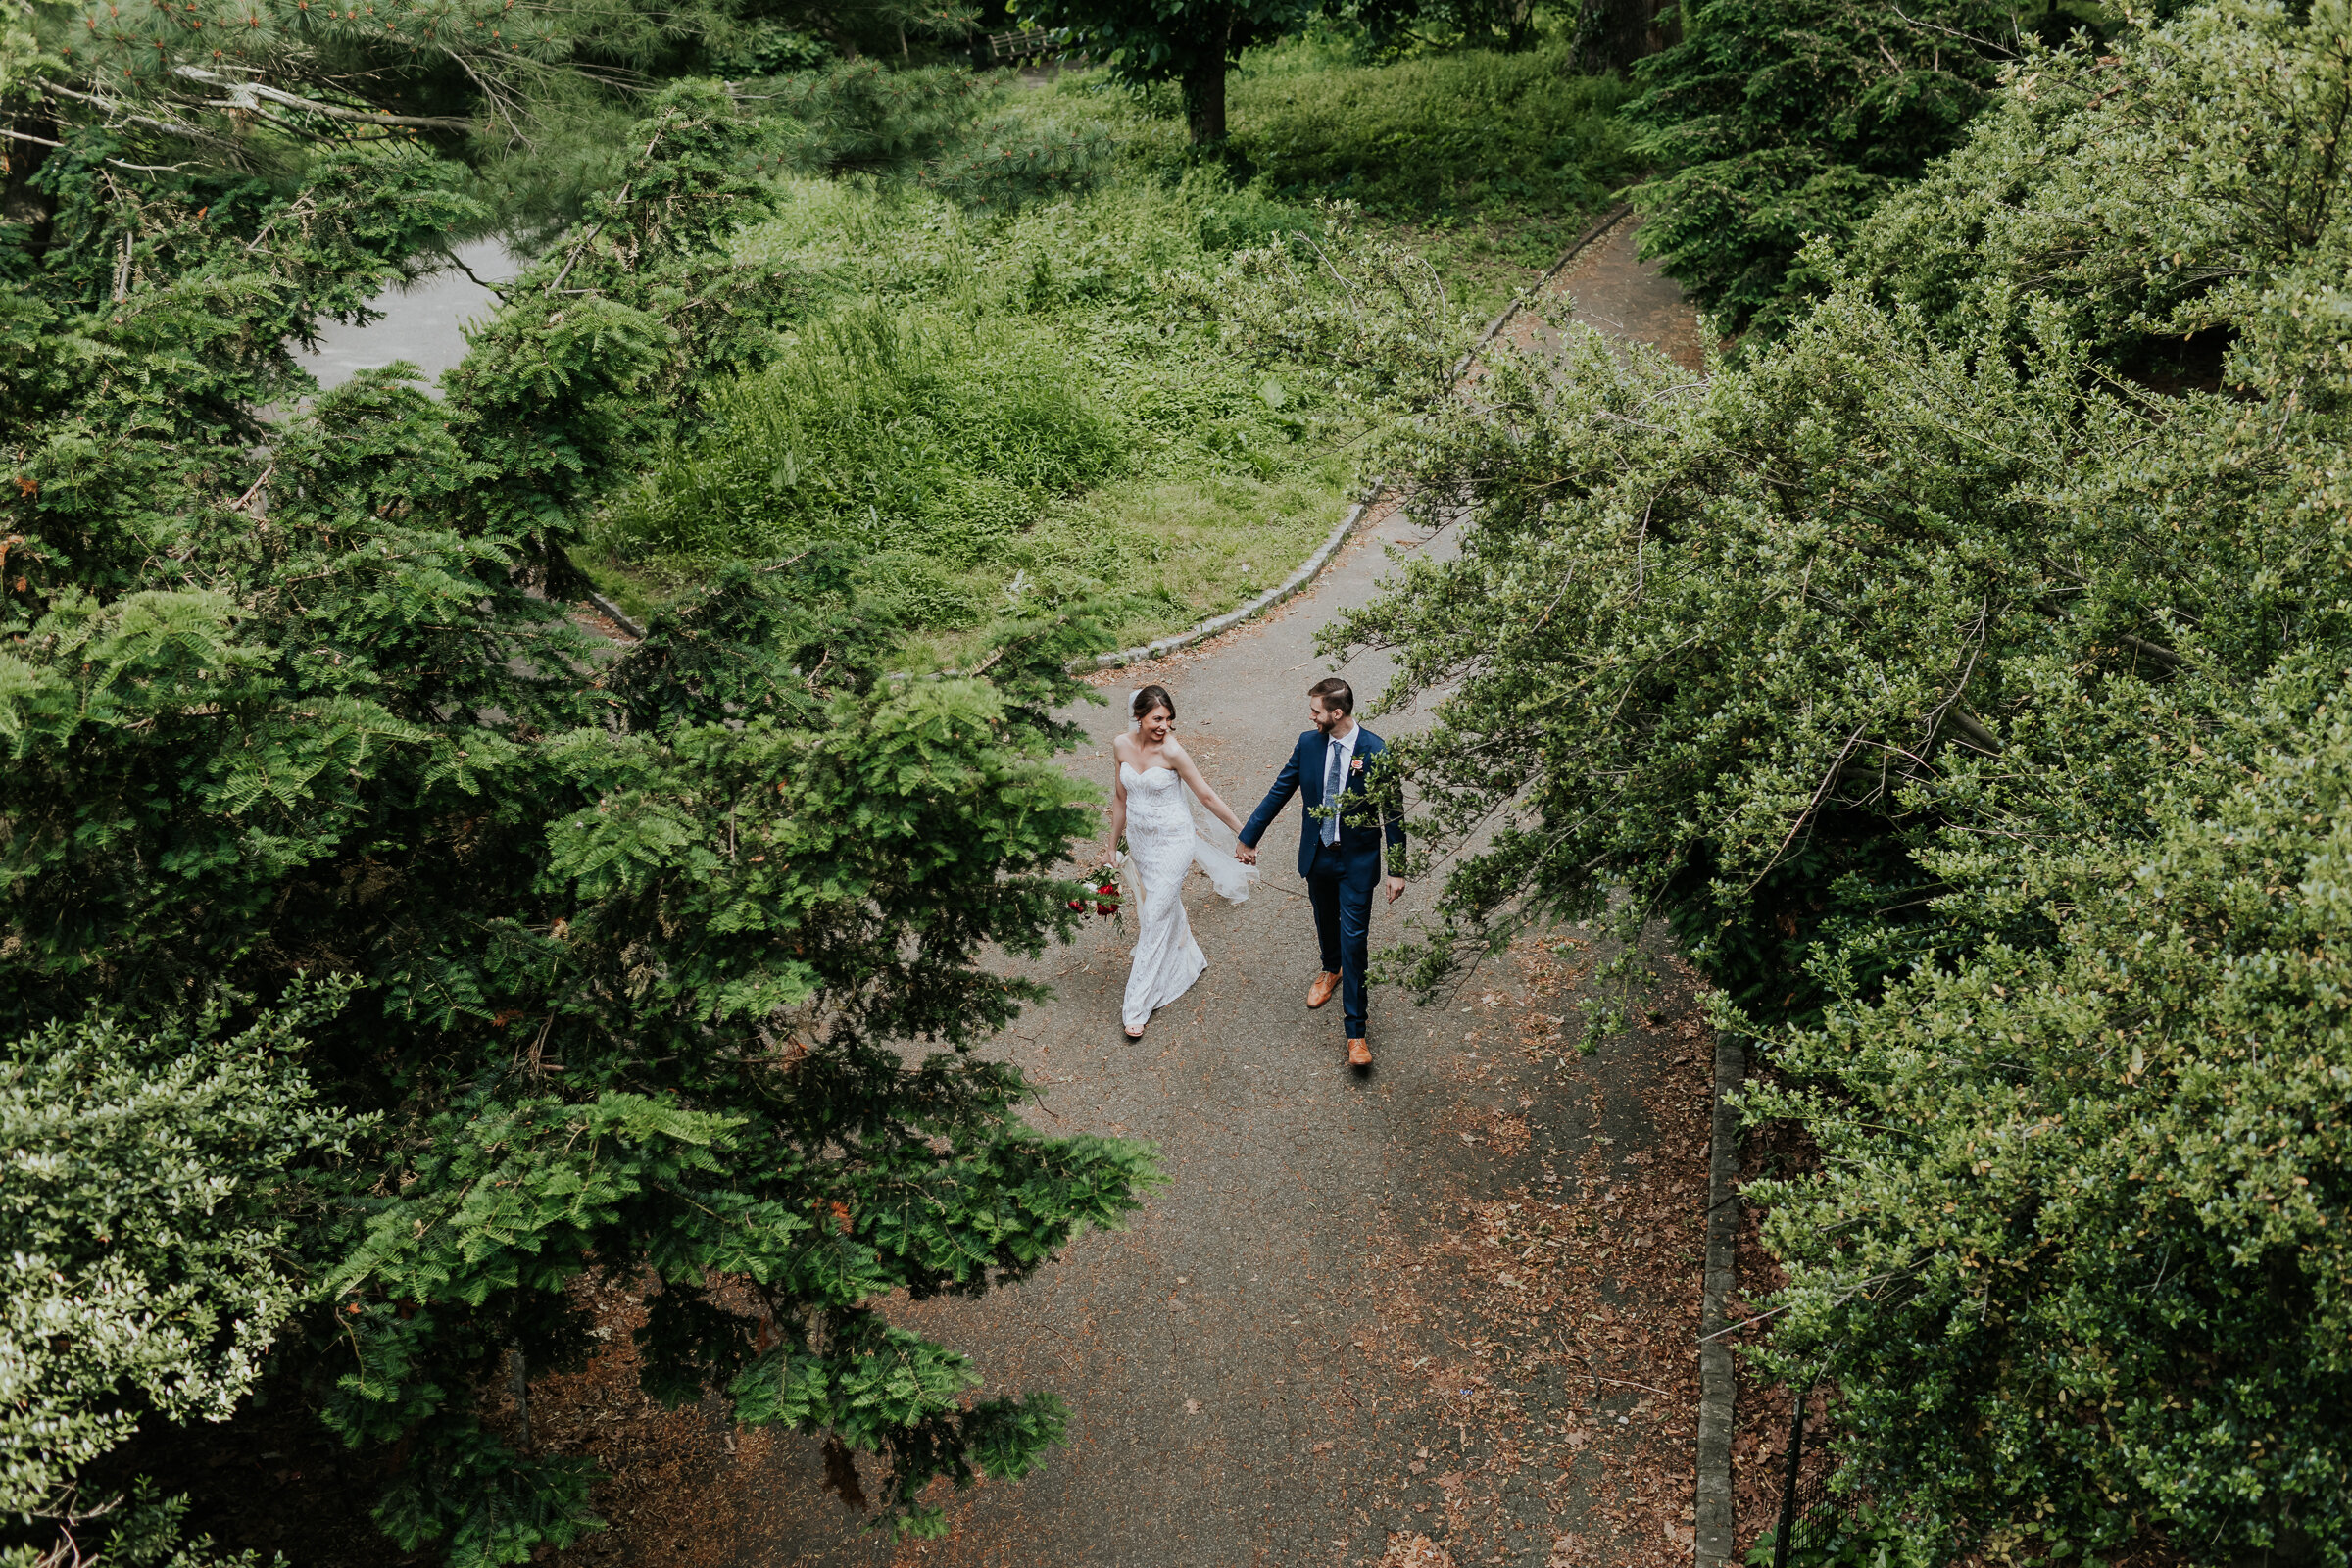 Fort-Tryon-Park-Elopement-NYC-Intimate-Wedding-Photographer-33.jpg